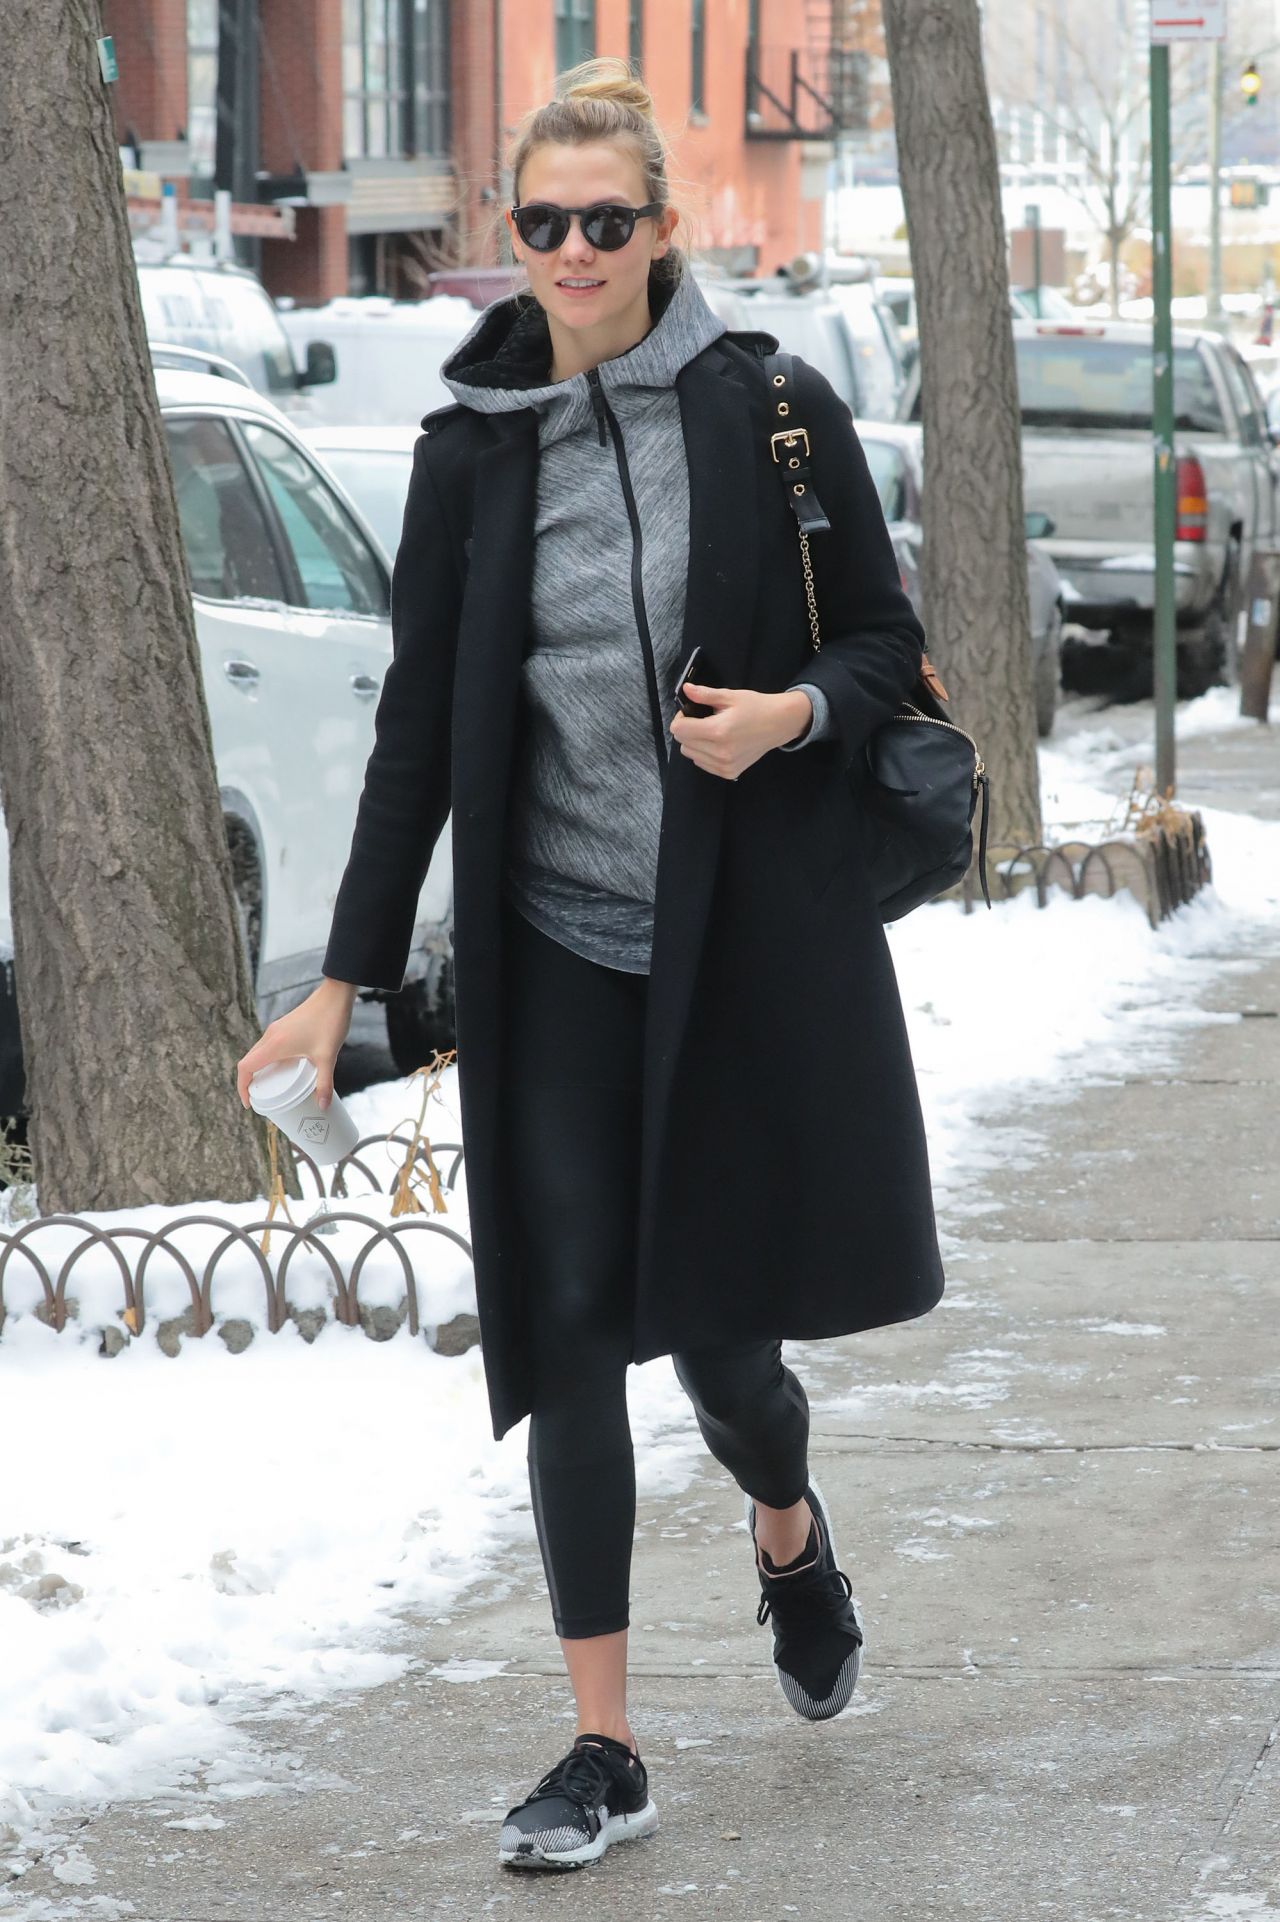 Karlie Kloss - Hits the Gym For a Morning Workout Session in NYC 1/9 ...